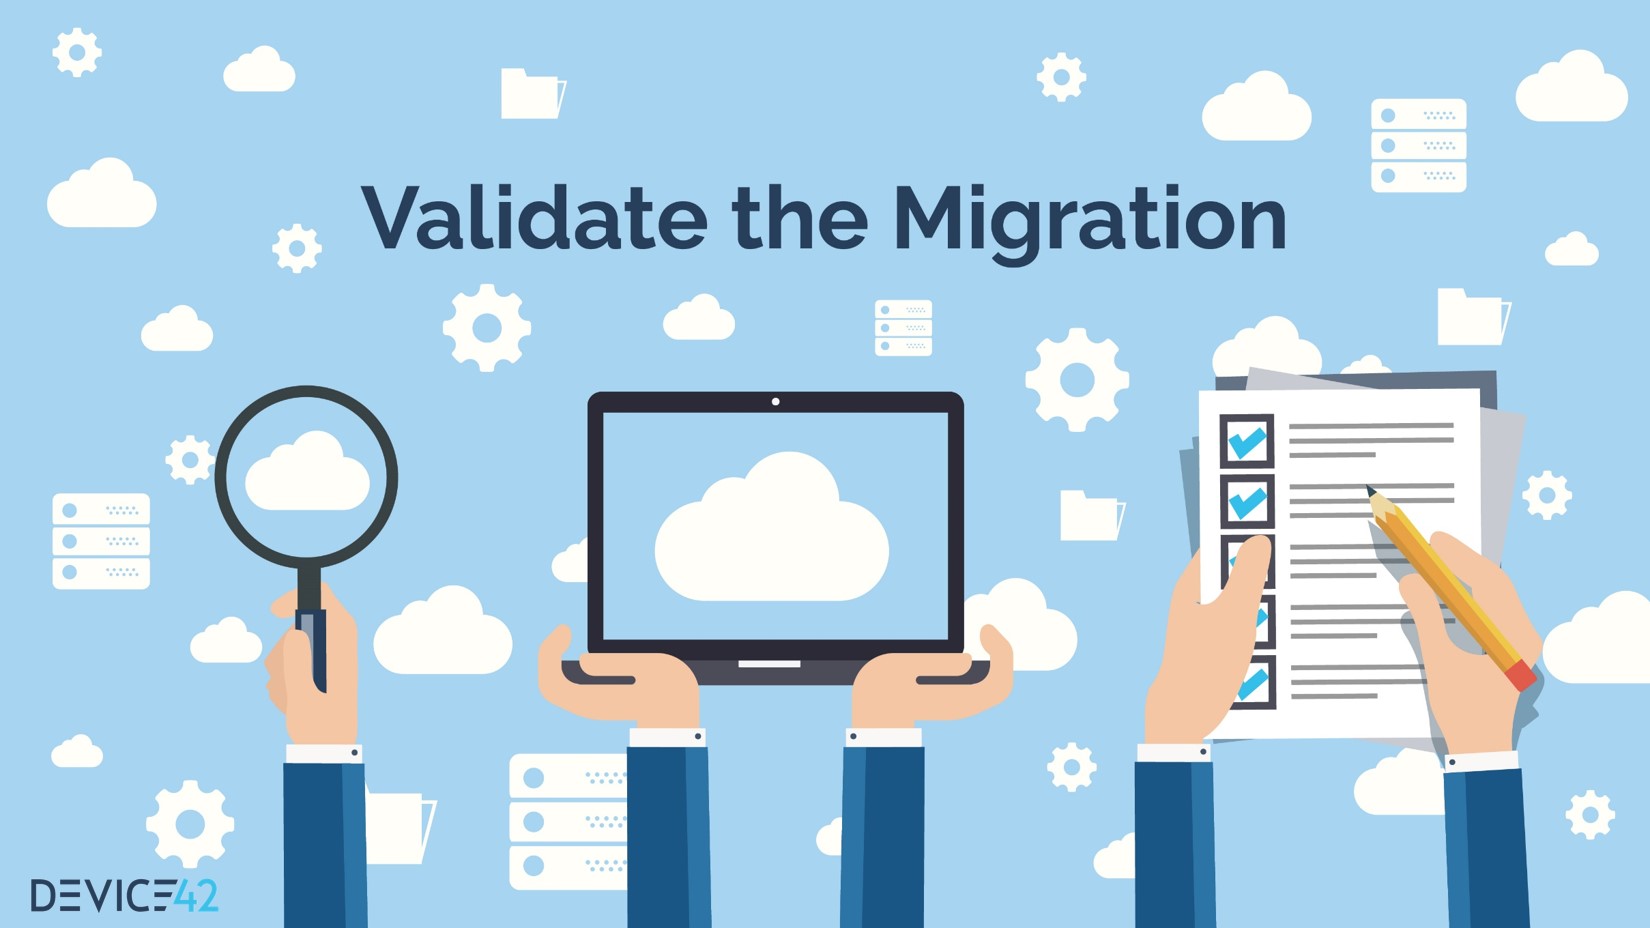 Validate the Migration